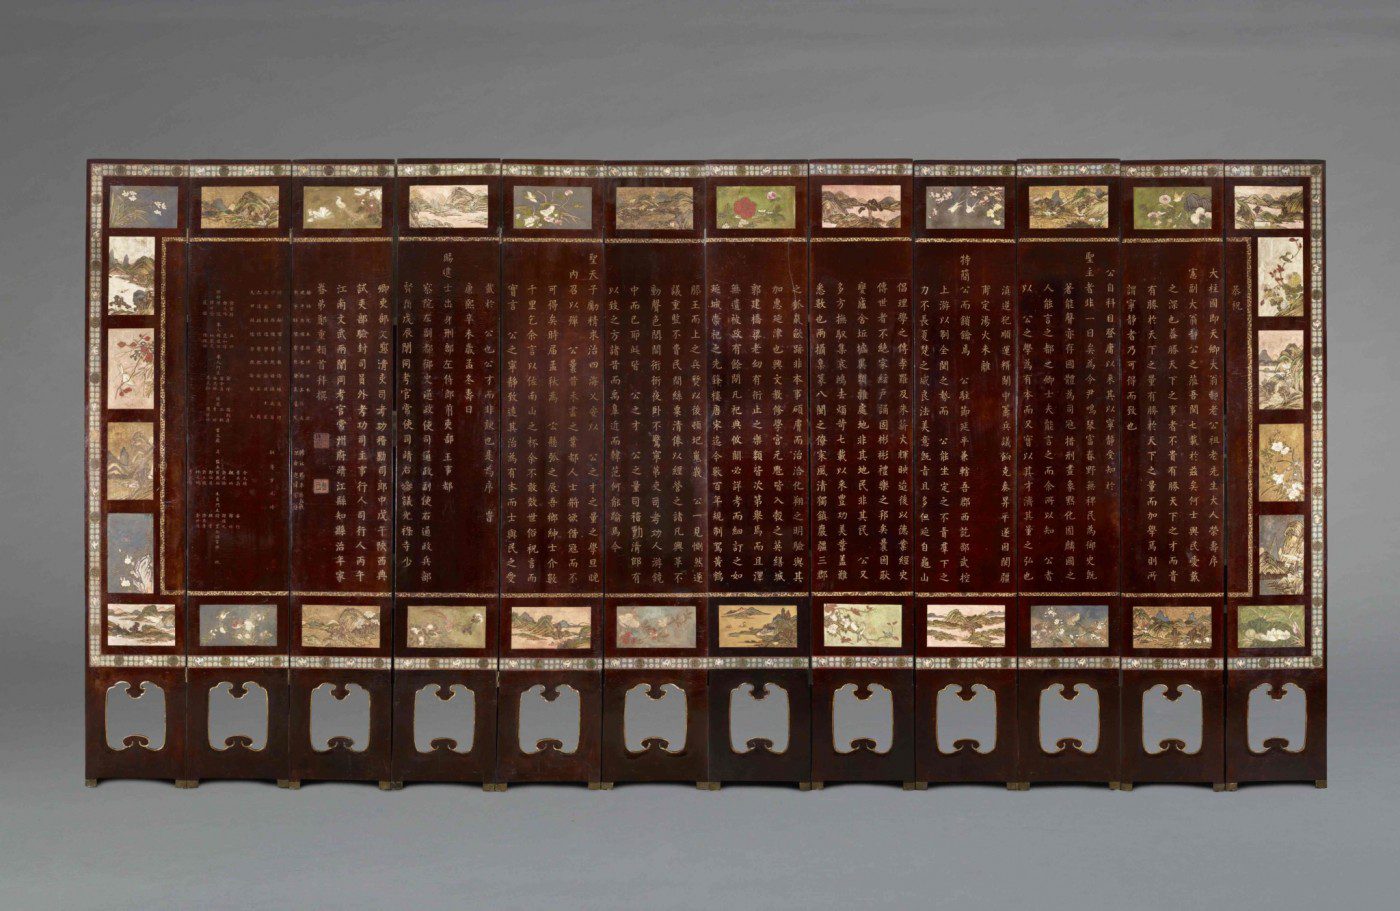 Back of the screen in Coromandel lacquer dated 1691